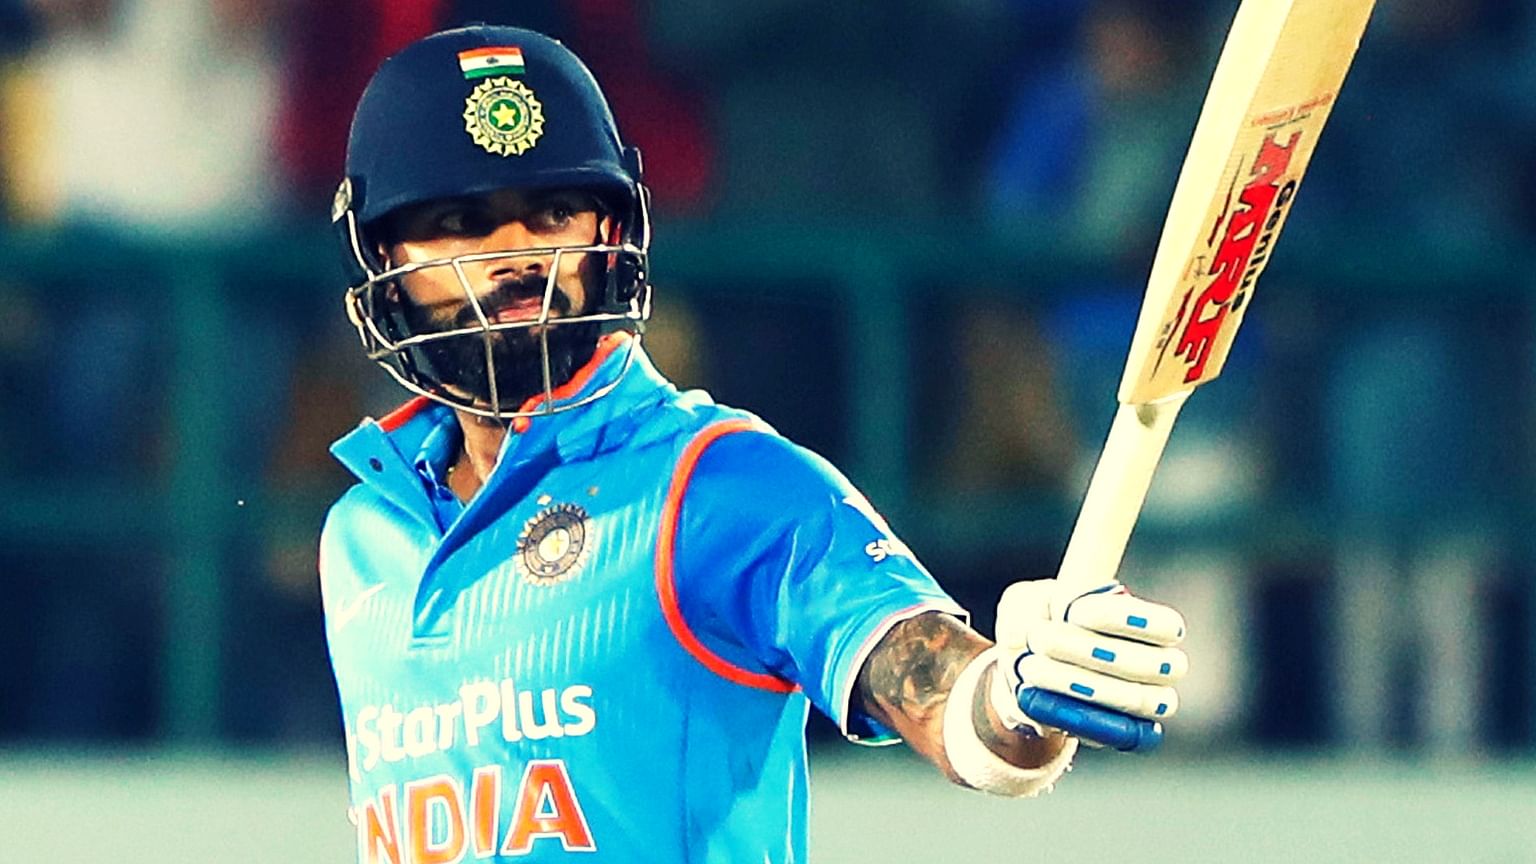 Virat Kohli will be hoping to continue his good form in the ODI series. (Photo: AP)